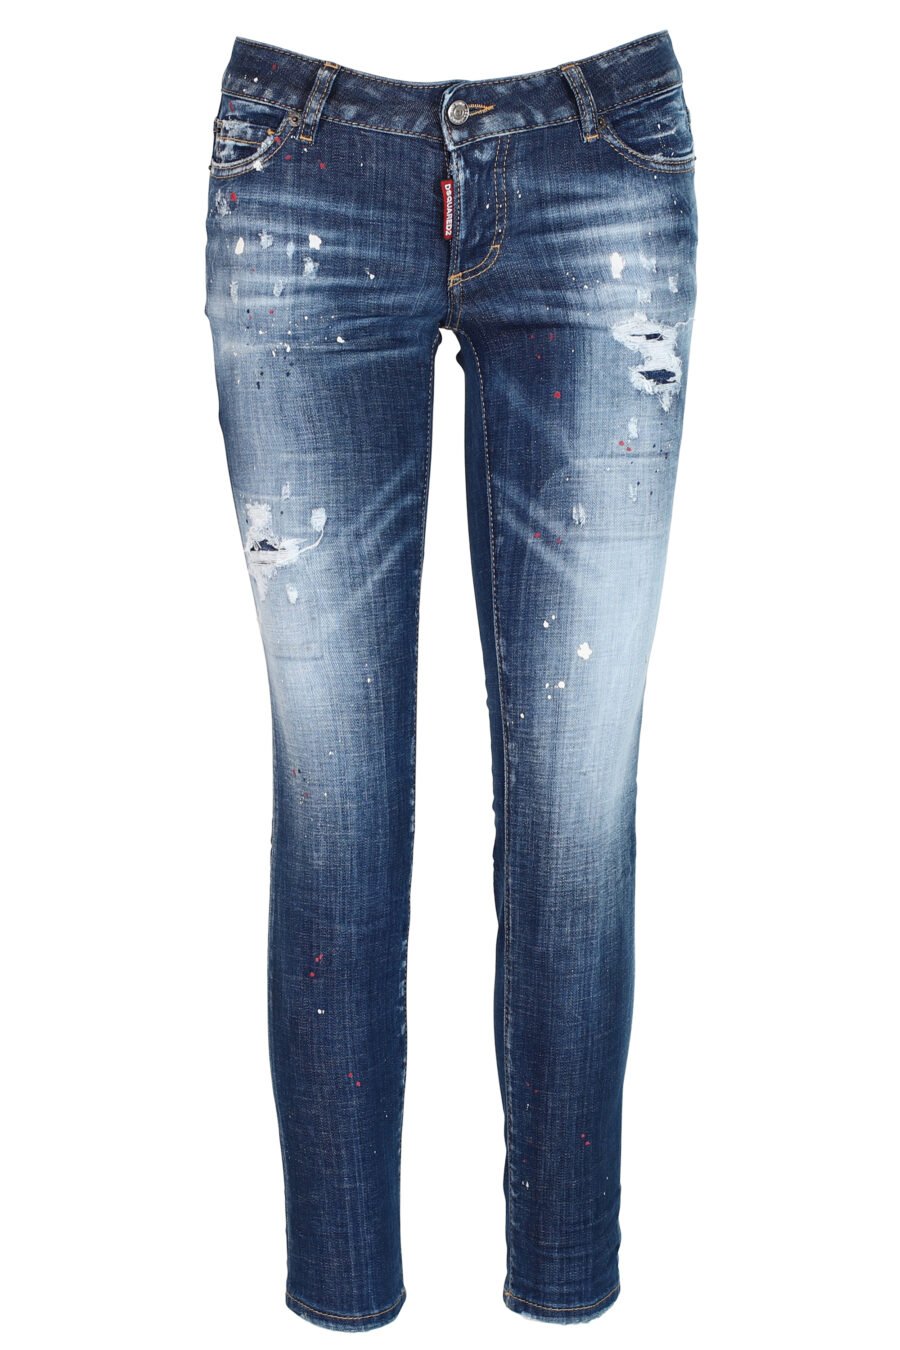 Jeans "Jennifer Jean" blue with splash paint and faded effect - 8052134937259